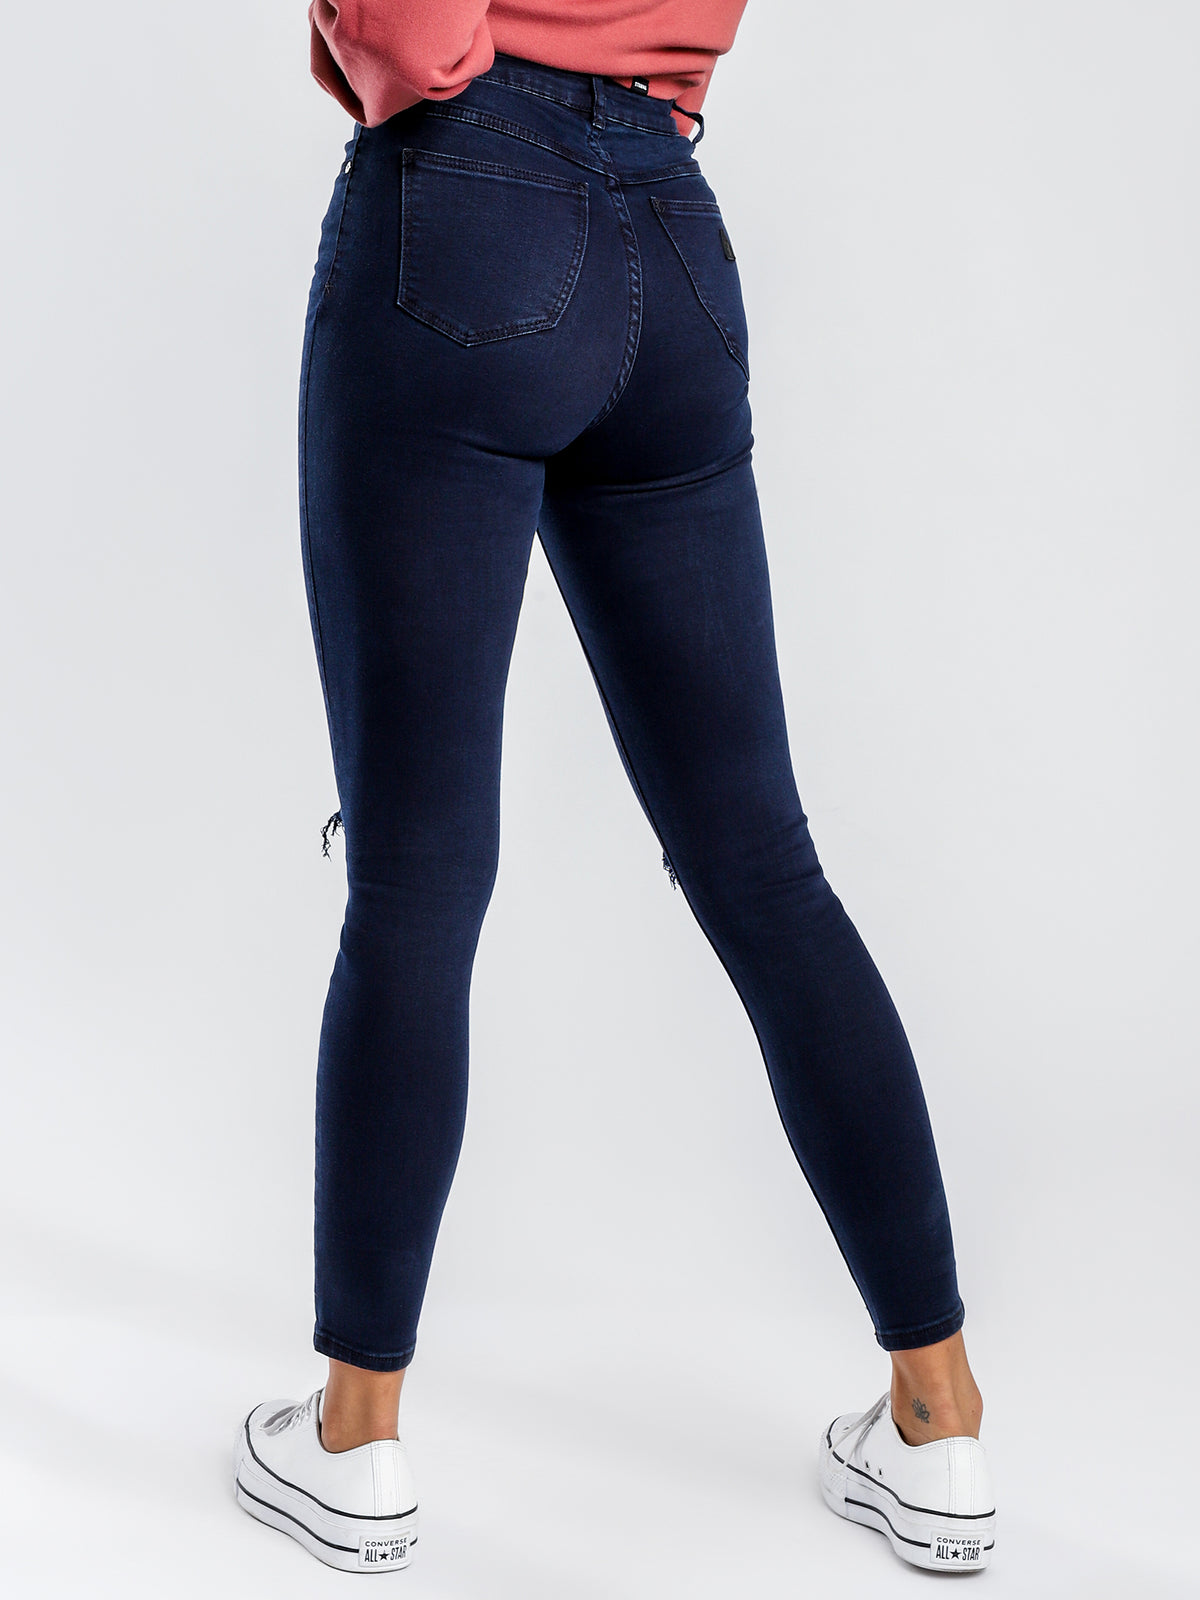 A High Waisted Skinny Anke Basher Jeans in Cherie